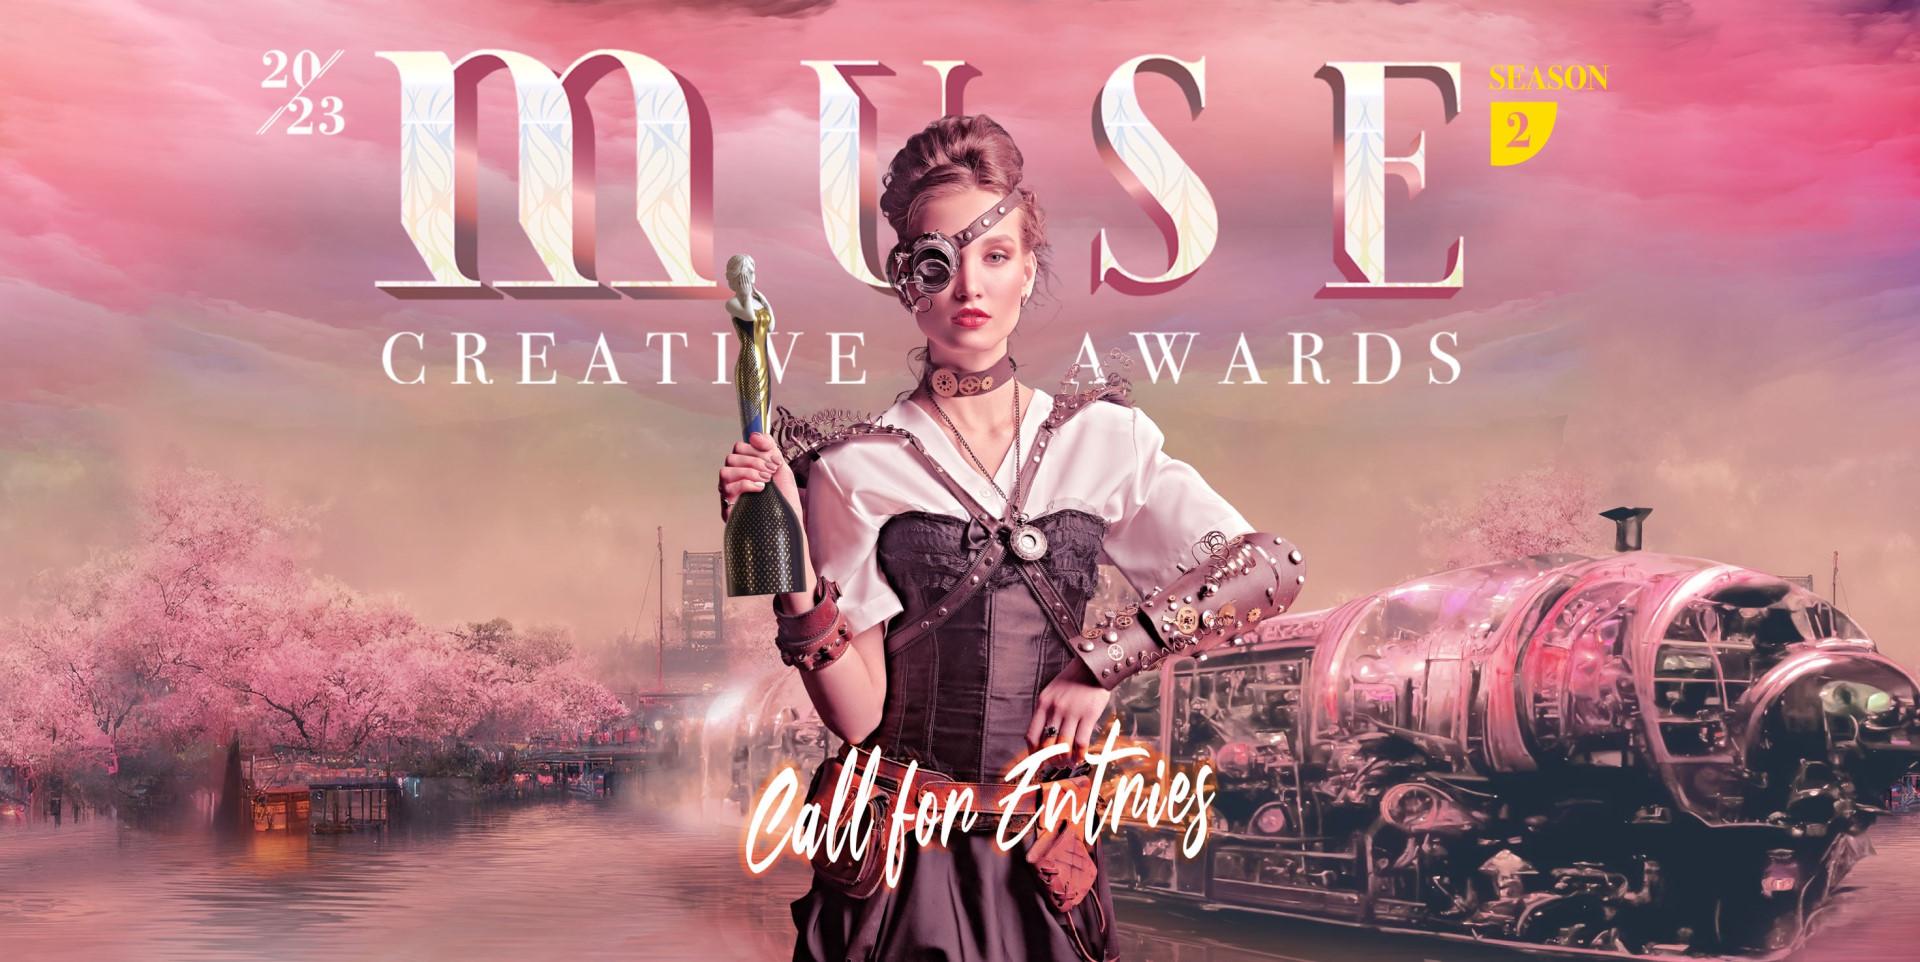 MUSE Creative Awards: Season 2 2023 is now open for entries!